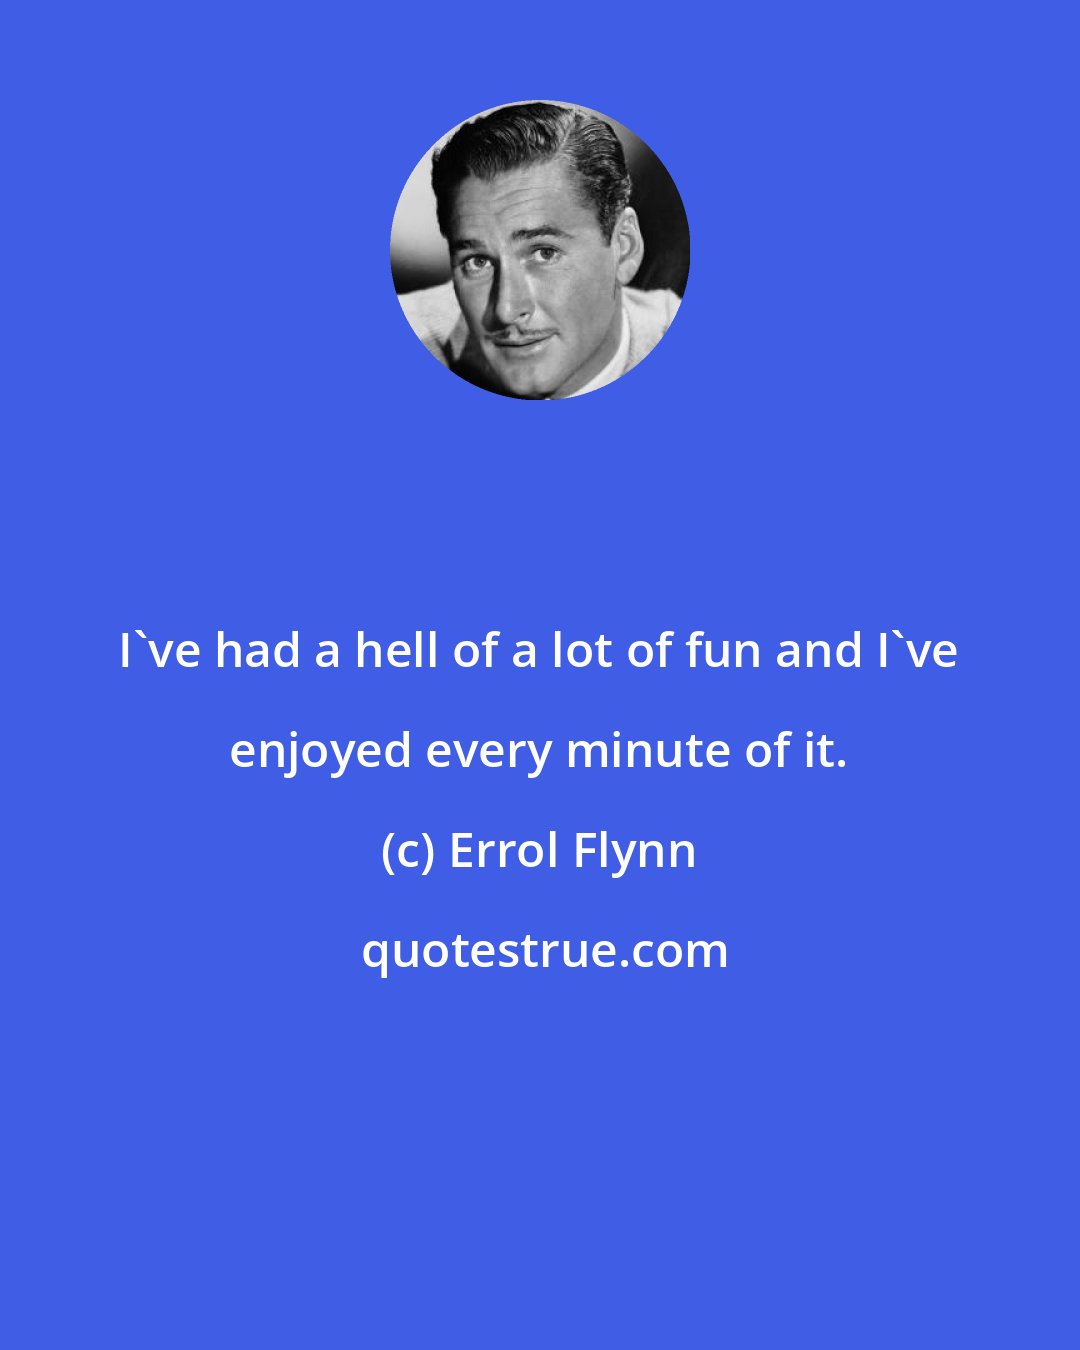 Errol Flynn: I've had a hell of a lot of fun and I've enjoyed every minute of it.